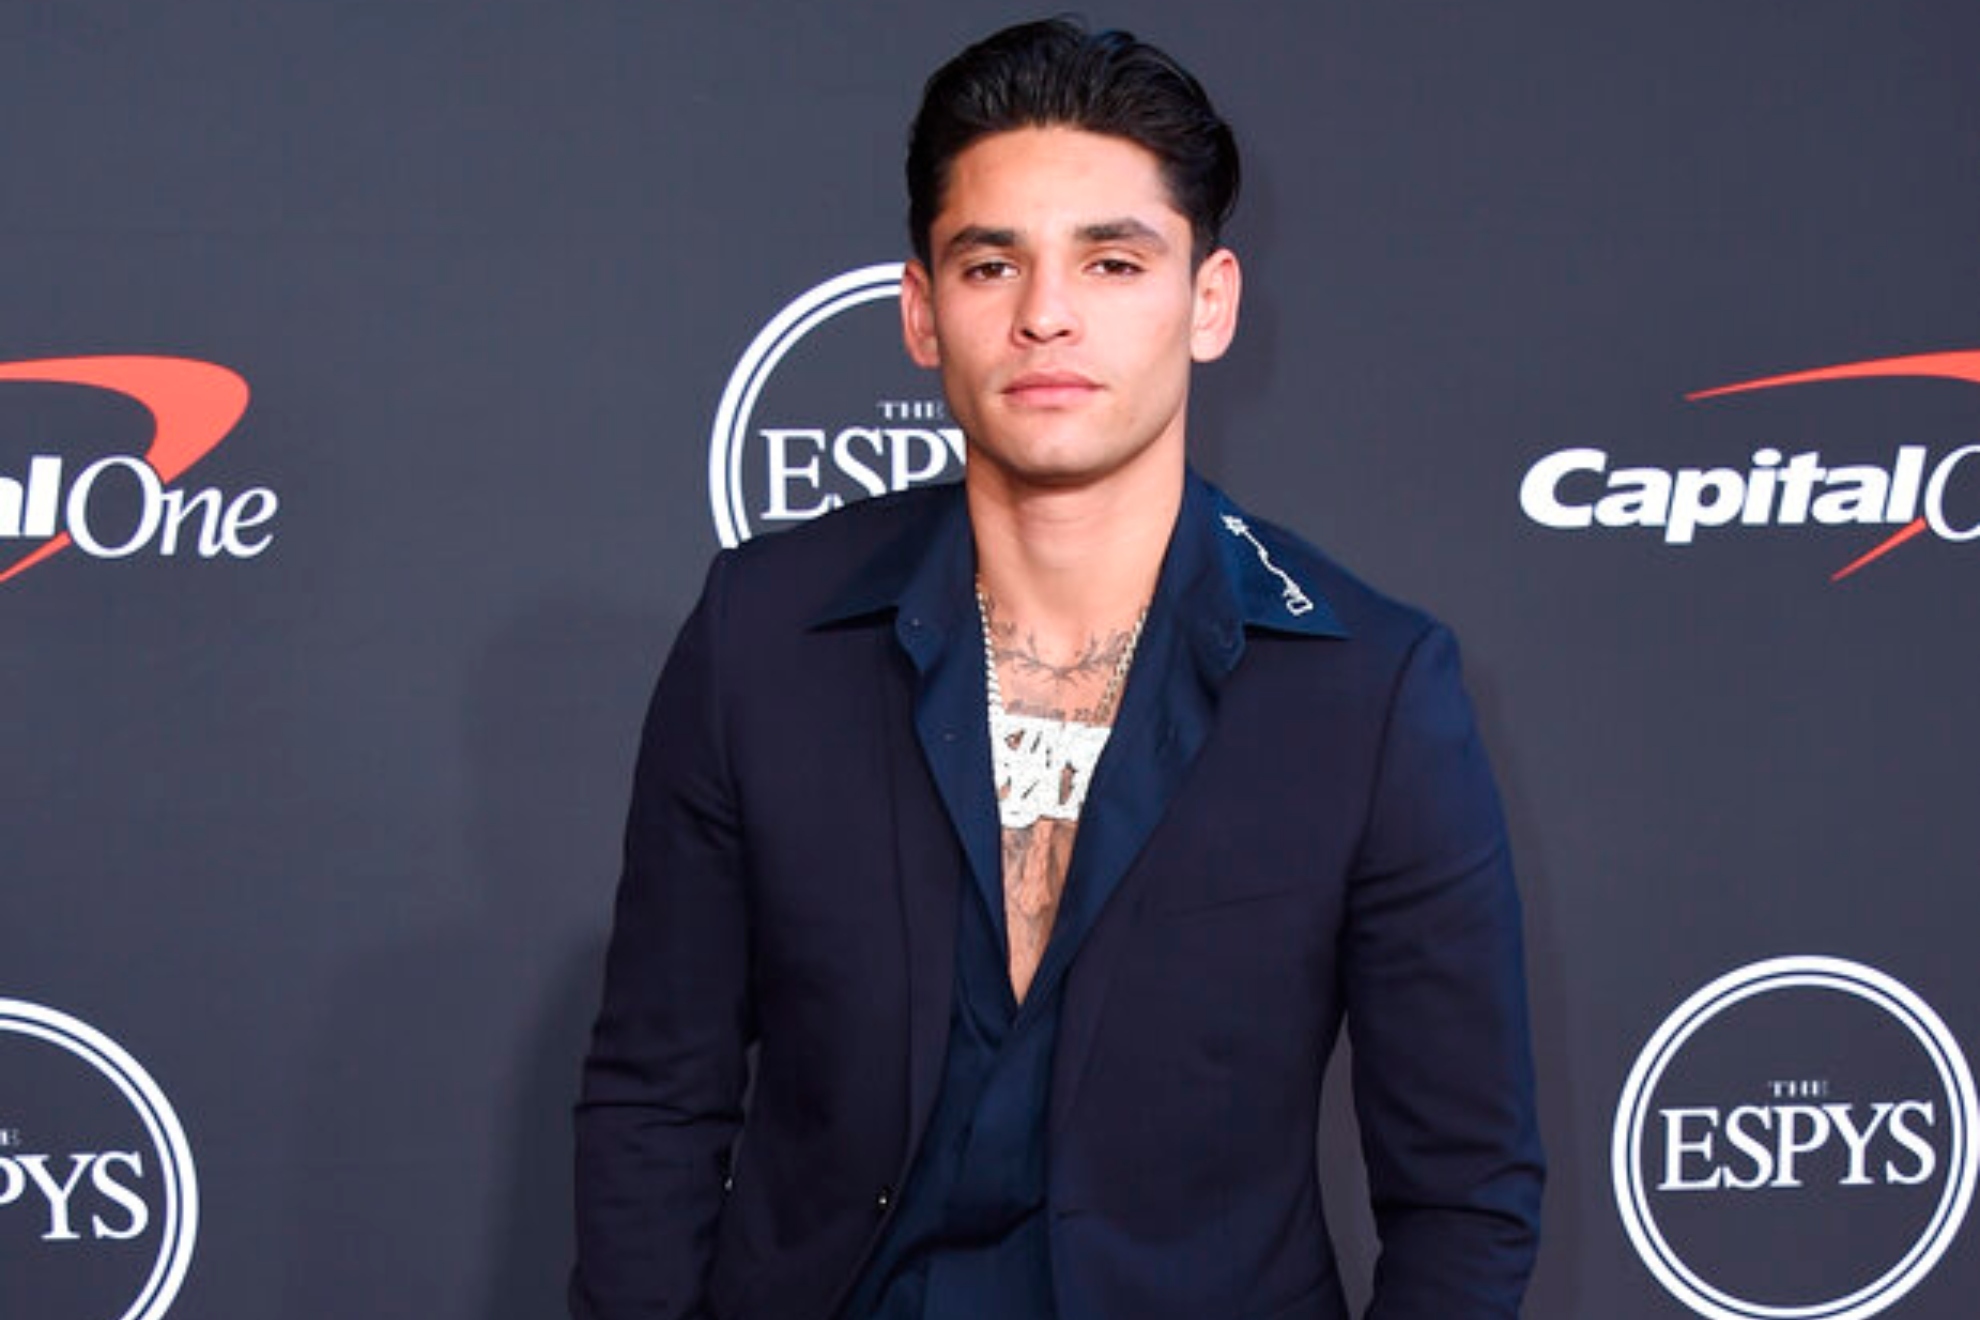 Ryan Garcia worries fans after constant posting, now claims he is hated for not shutting up